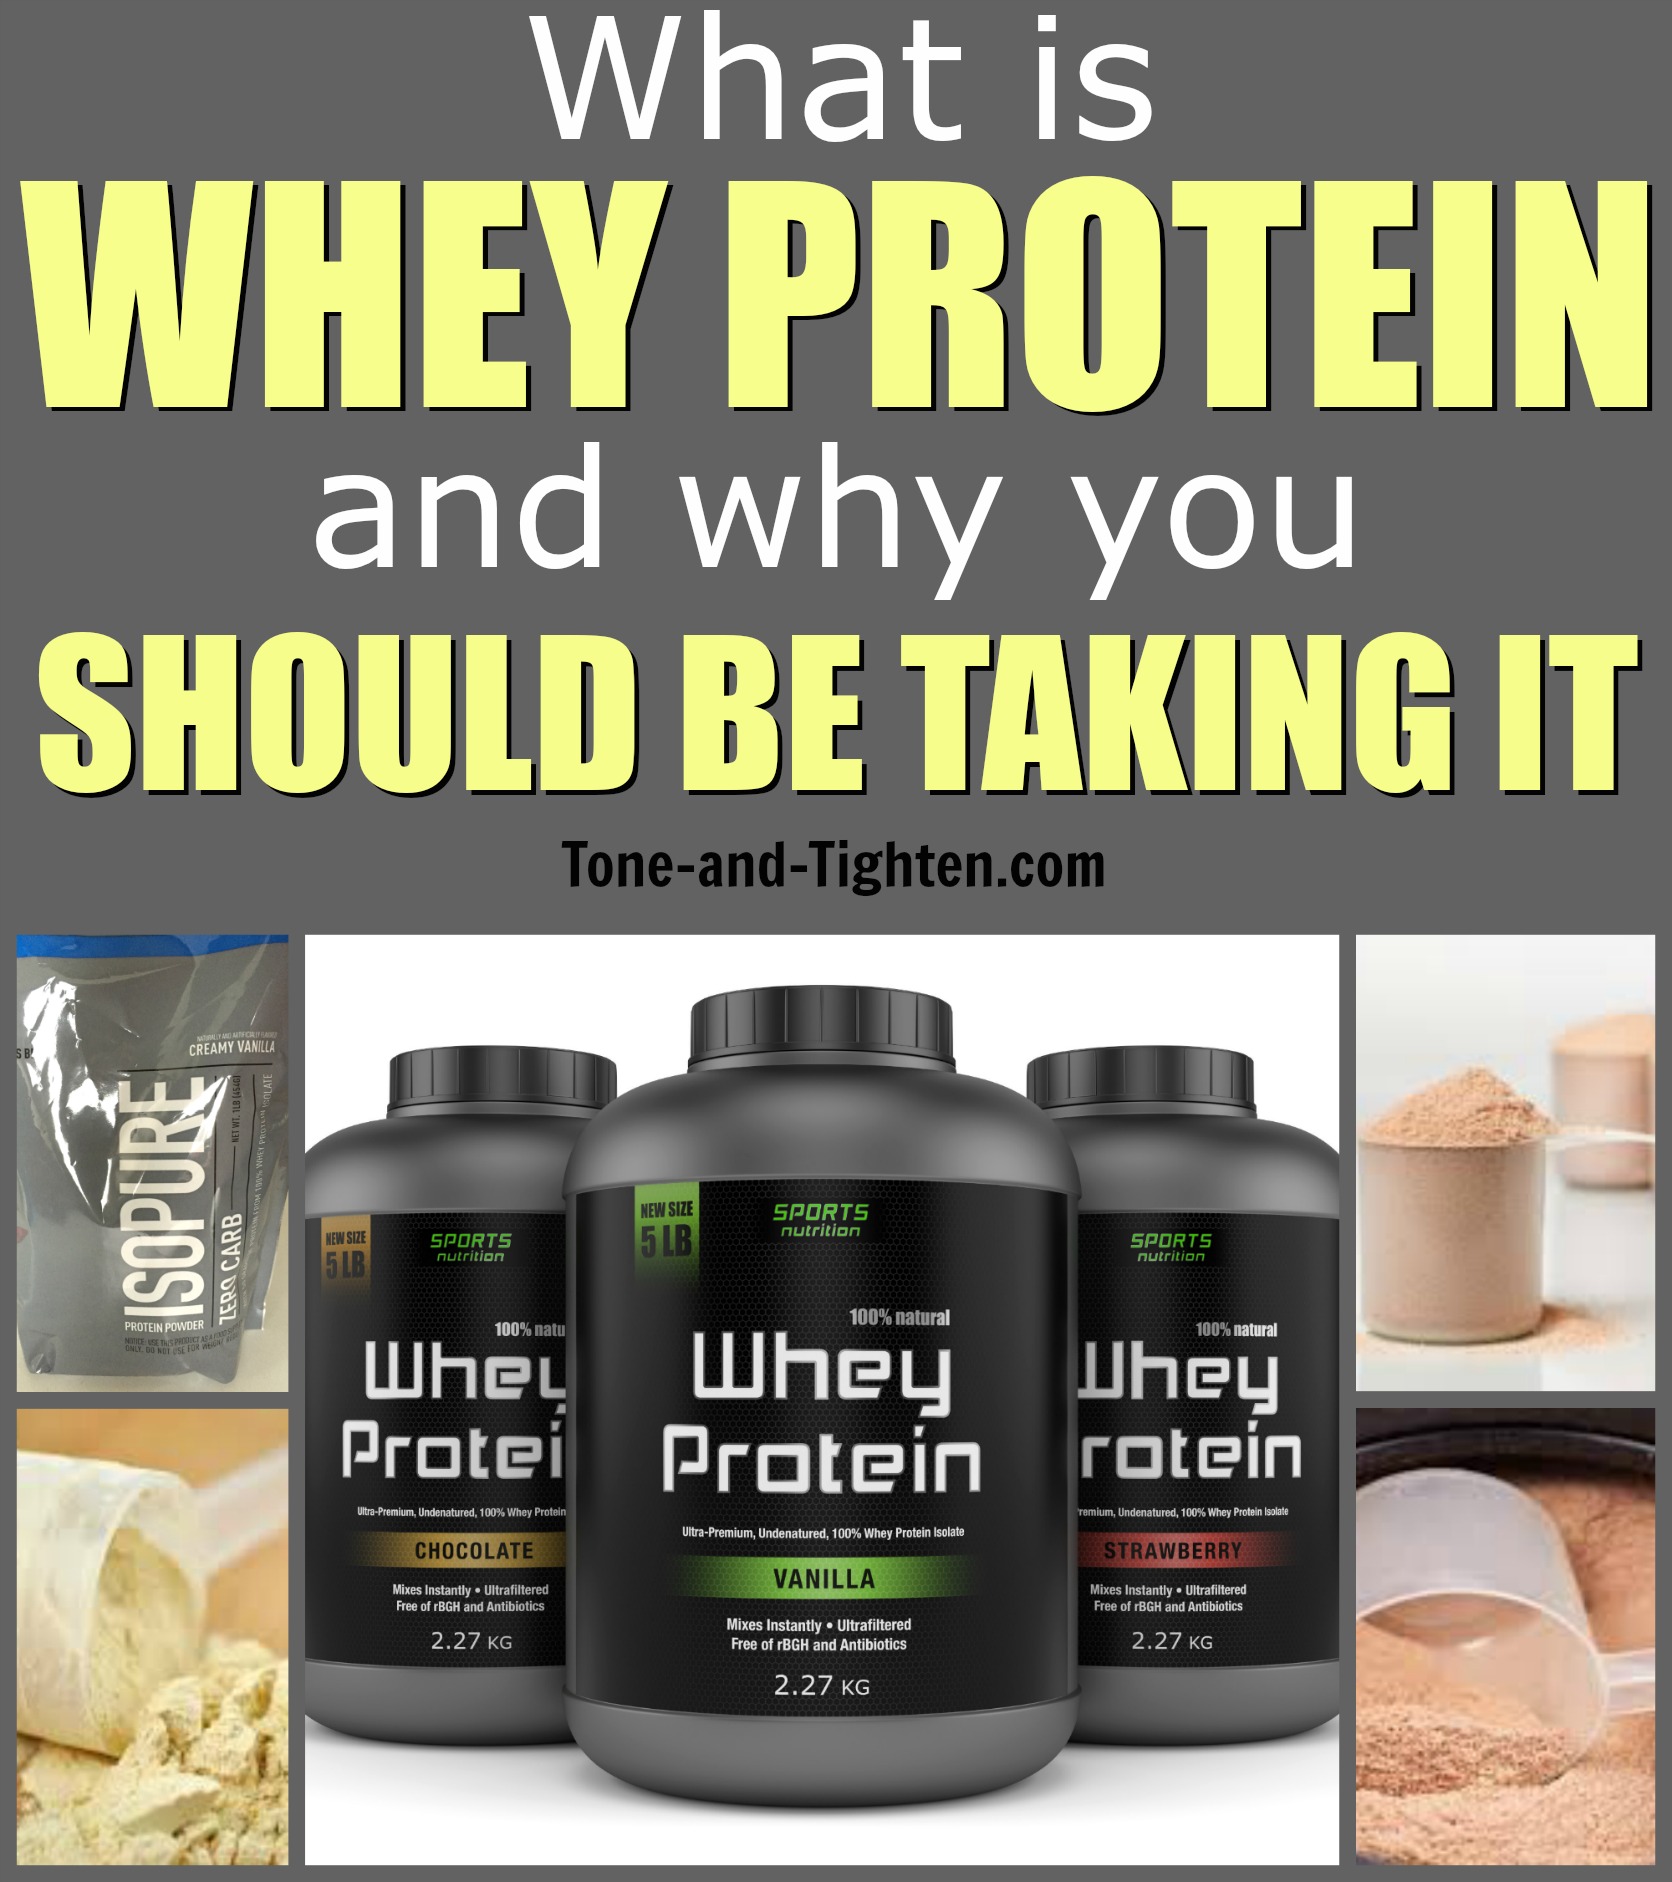 What is whey protein and why should I take it when I workout?